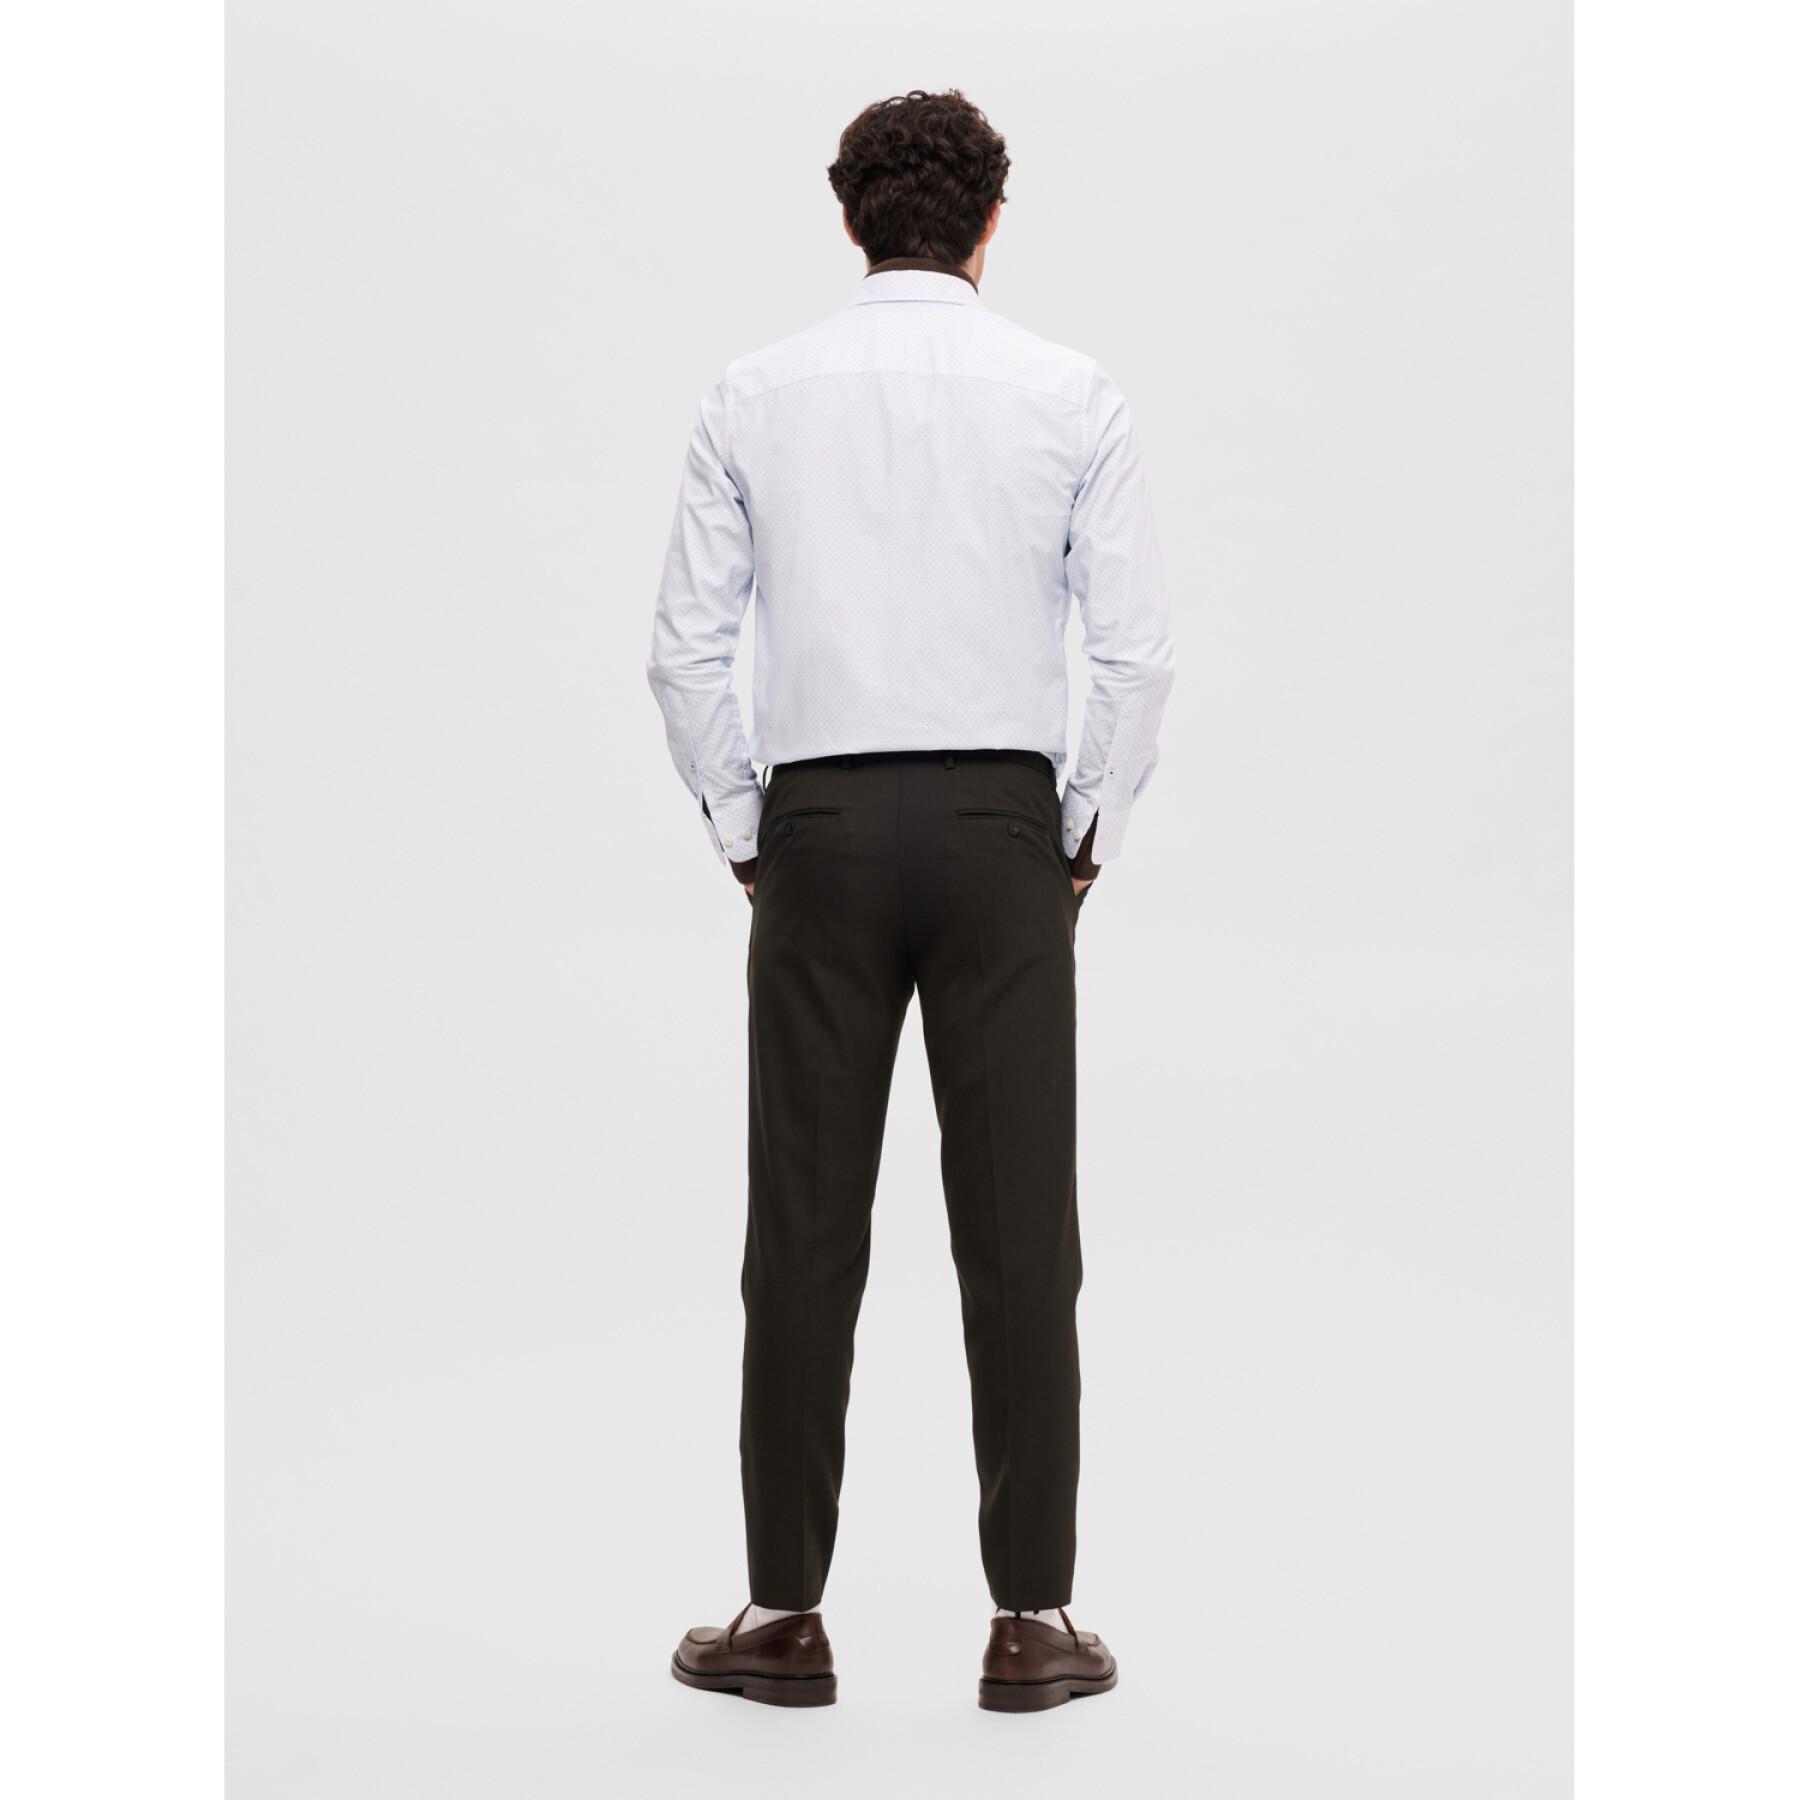 Long sleeve shirt Selected Slimdetail Classic